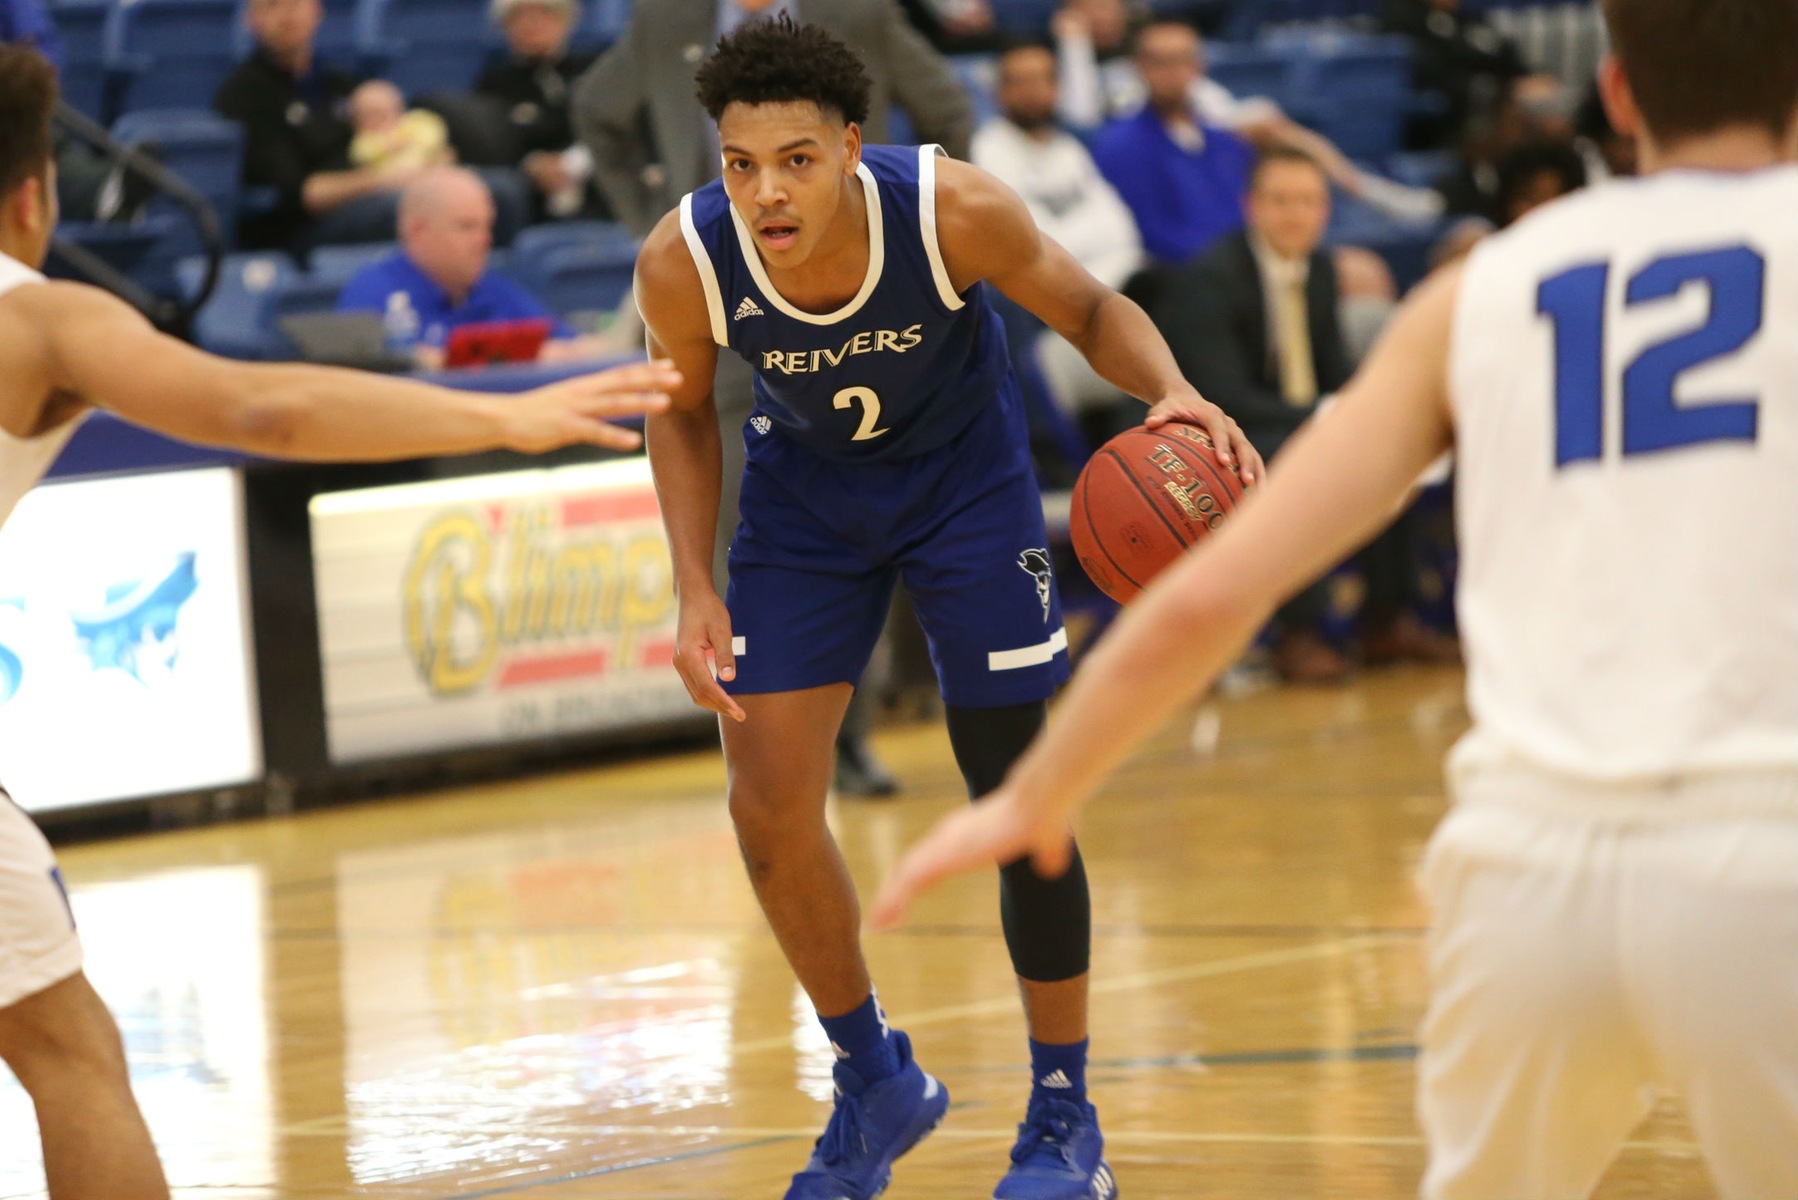 Josiah Strong scored 17 of his game high 19 points in the second half as Iowa Western stayed within one game of first place in conference play with a 81-76 road victory at Marshalltown.